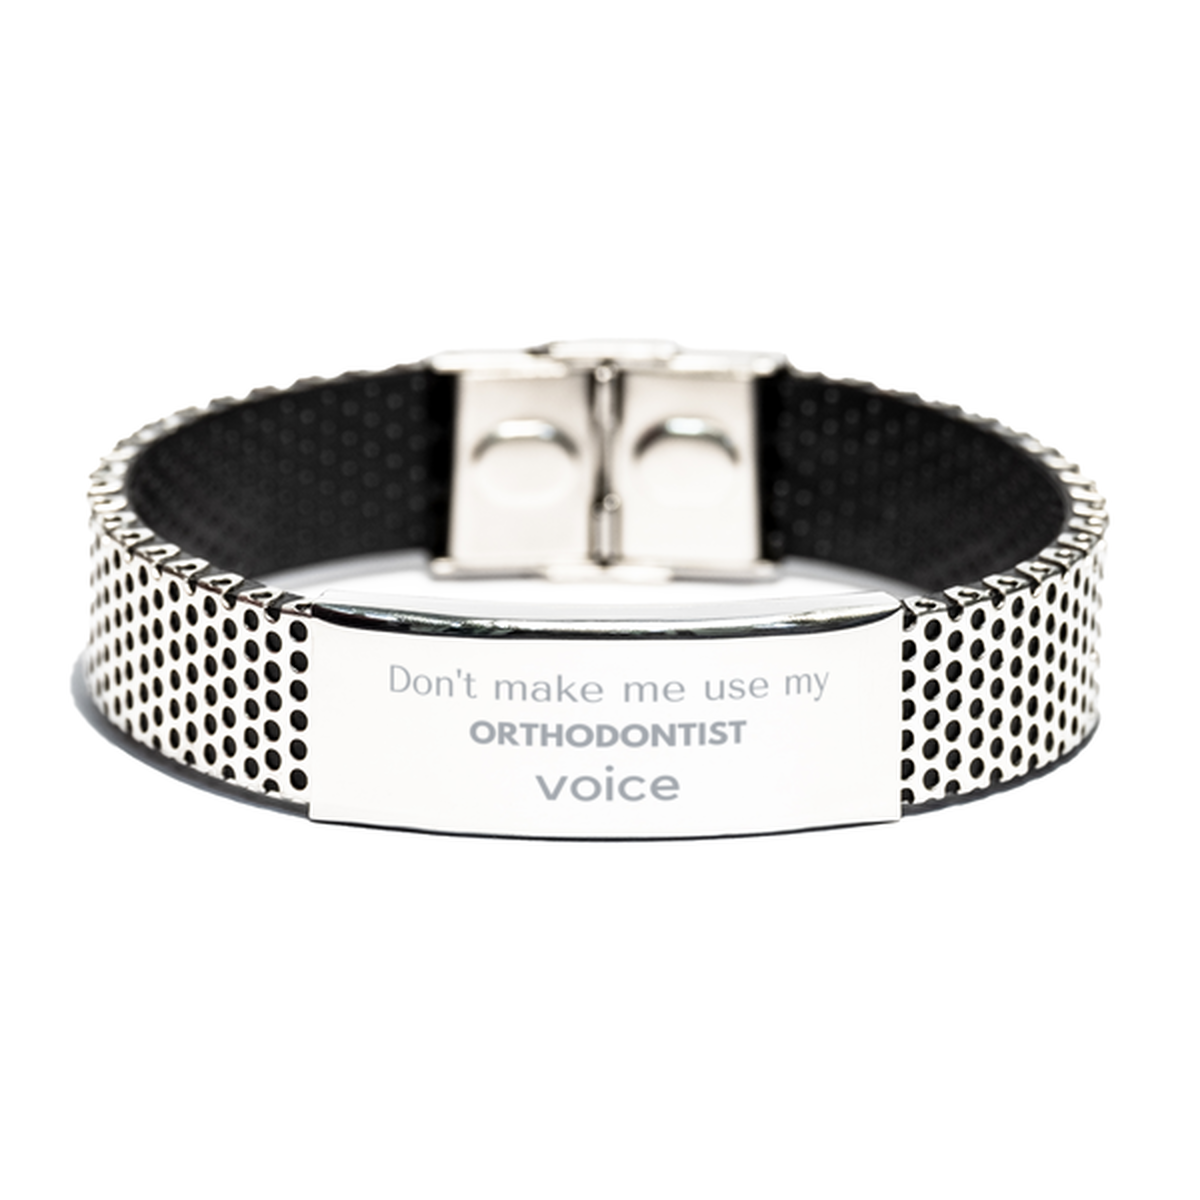 Don't make me use my Orthodontist voice, Sarcasm Orthodontist Gifts, Christmas Orthodontist Stainless Steel Bracelet Birthday Unique Gifts For Orthodontist Coworkers, Men, Women, Colleague, Friends